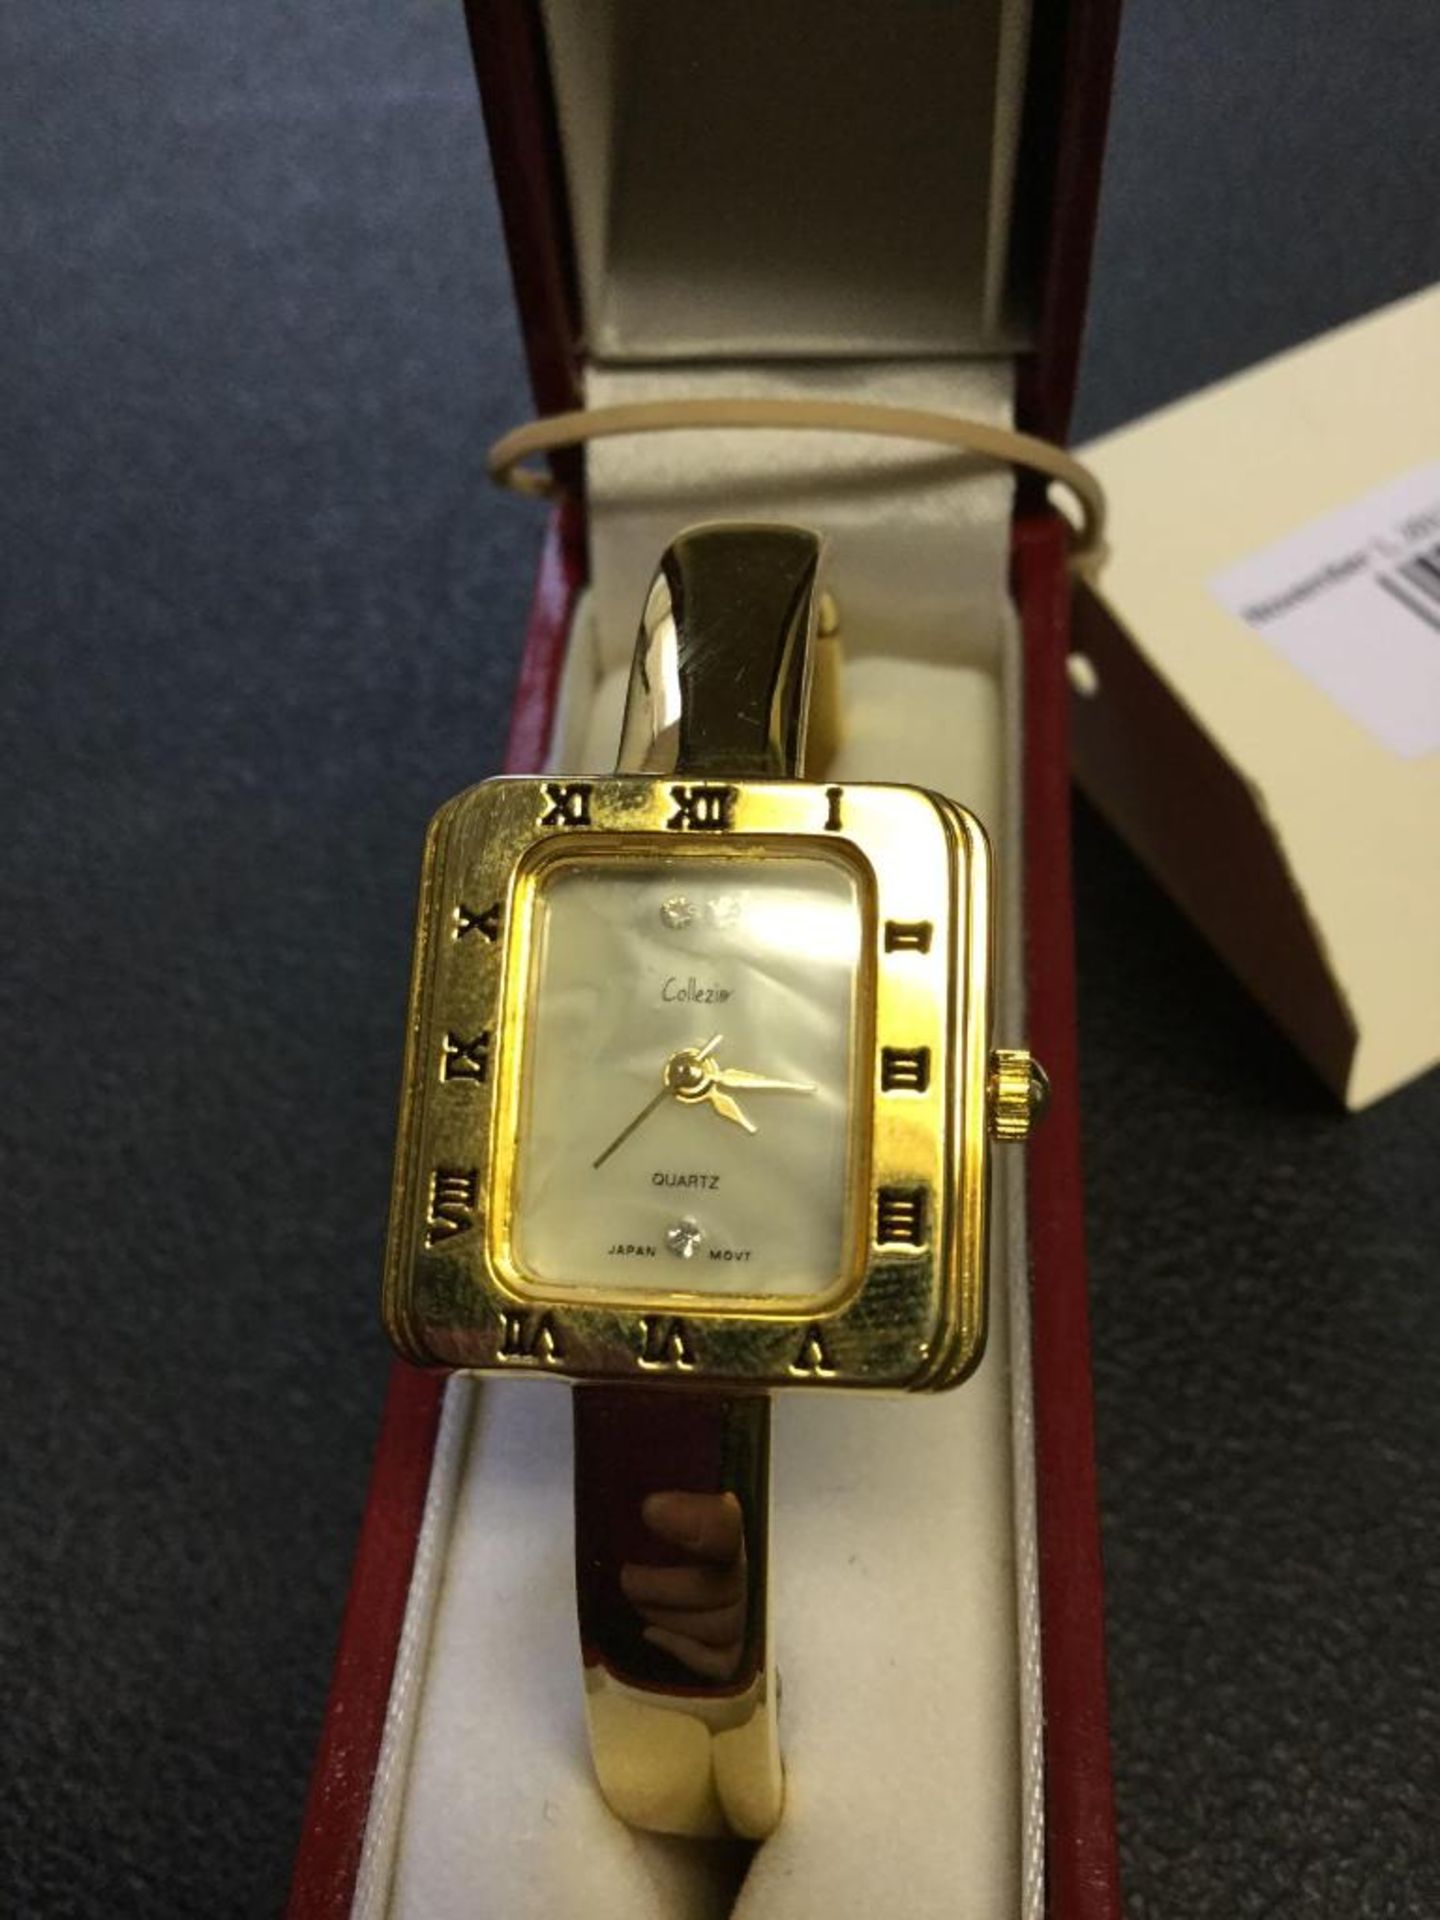 Collezie Bangle Style Ladies Watch with shell face and gold tone band - Image 3 of 4